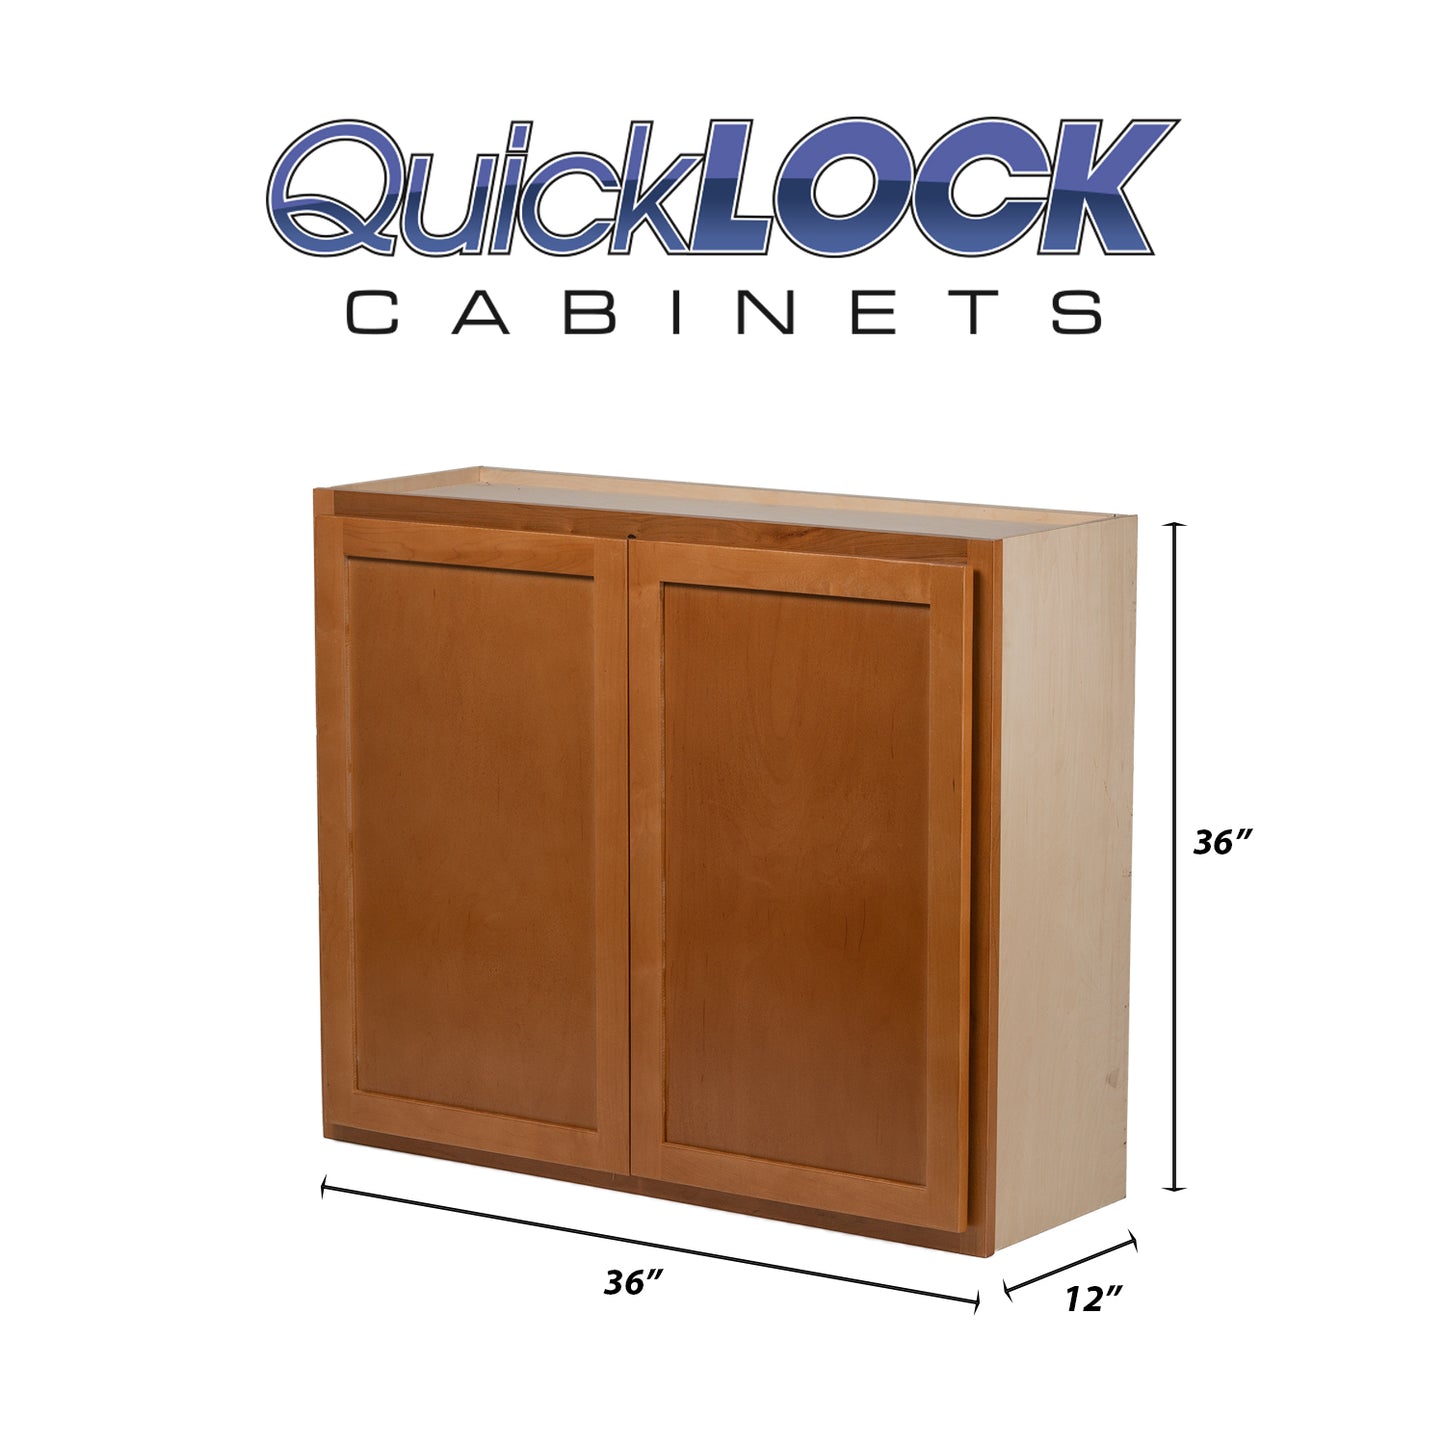 Quicklock RTA (Ready-to-Assemble) Provincial Stain 36"Wx36"Hx12"D Wall Cabinet